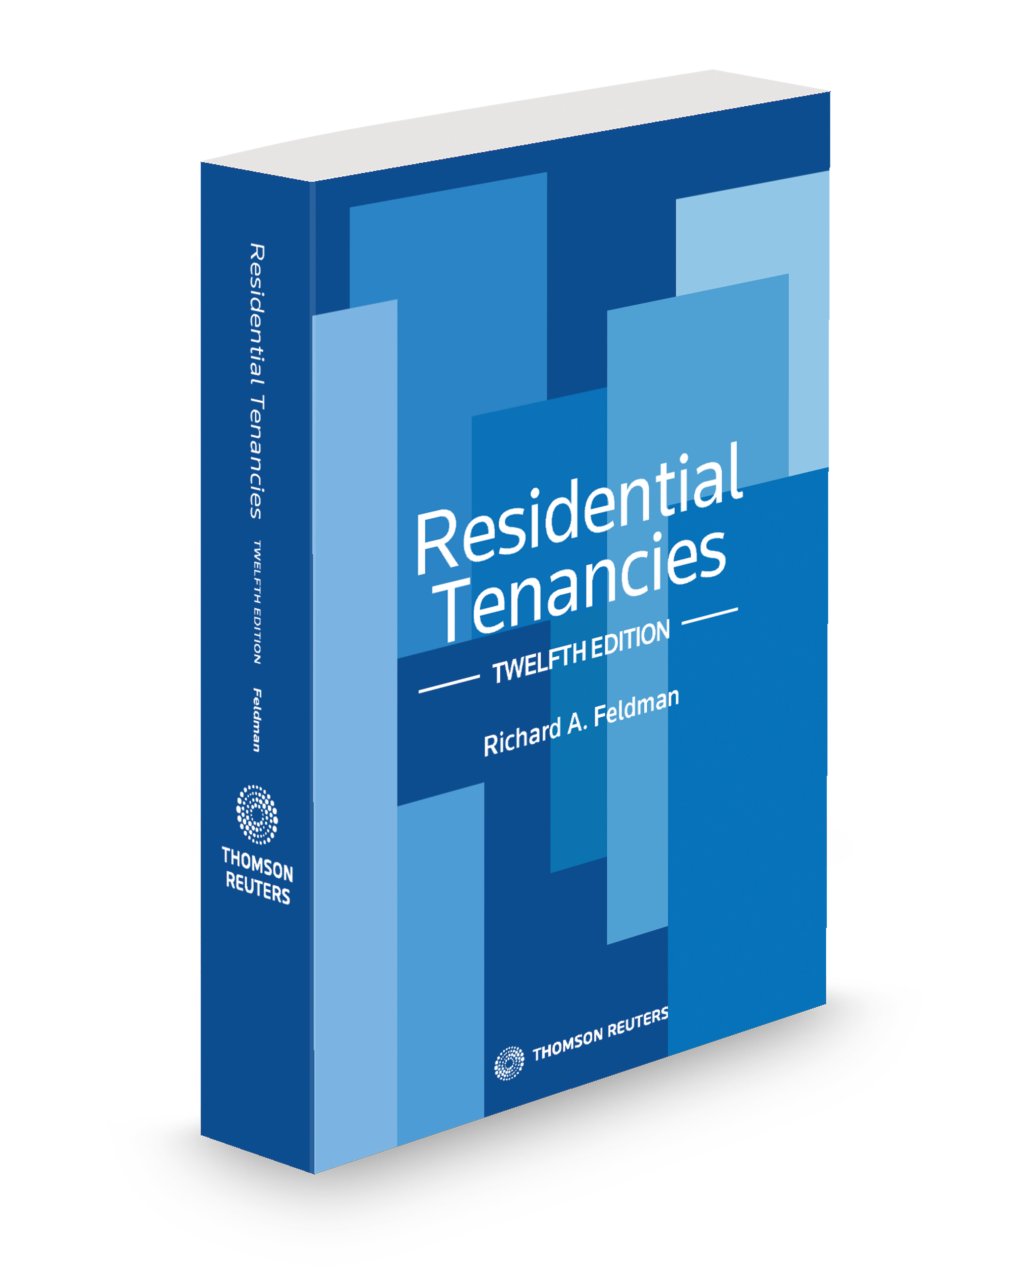 Cover image of Residential Tenancies, 12th Edition